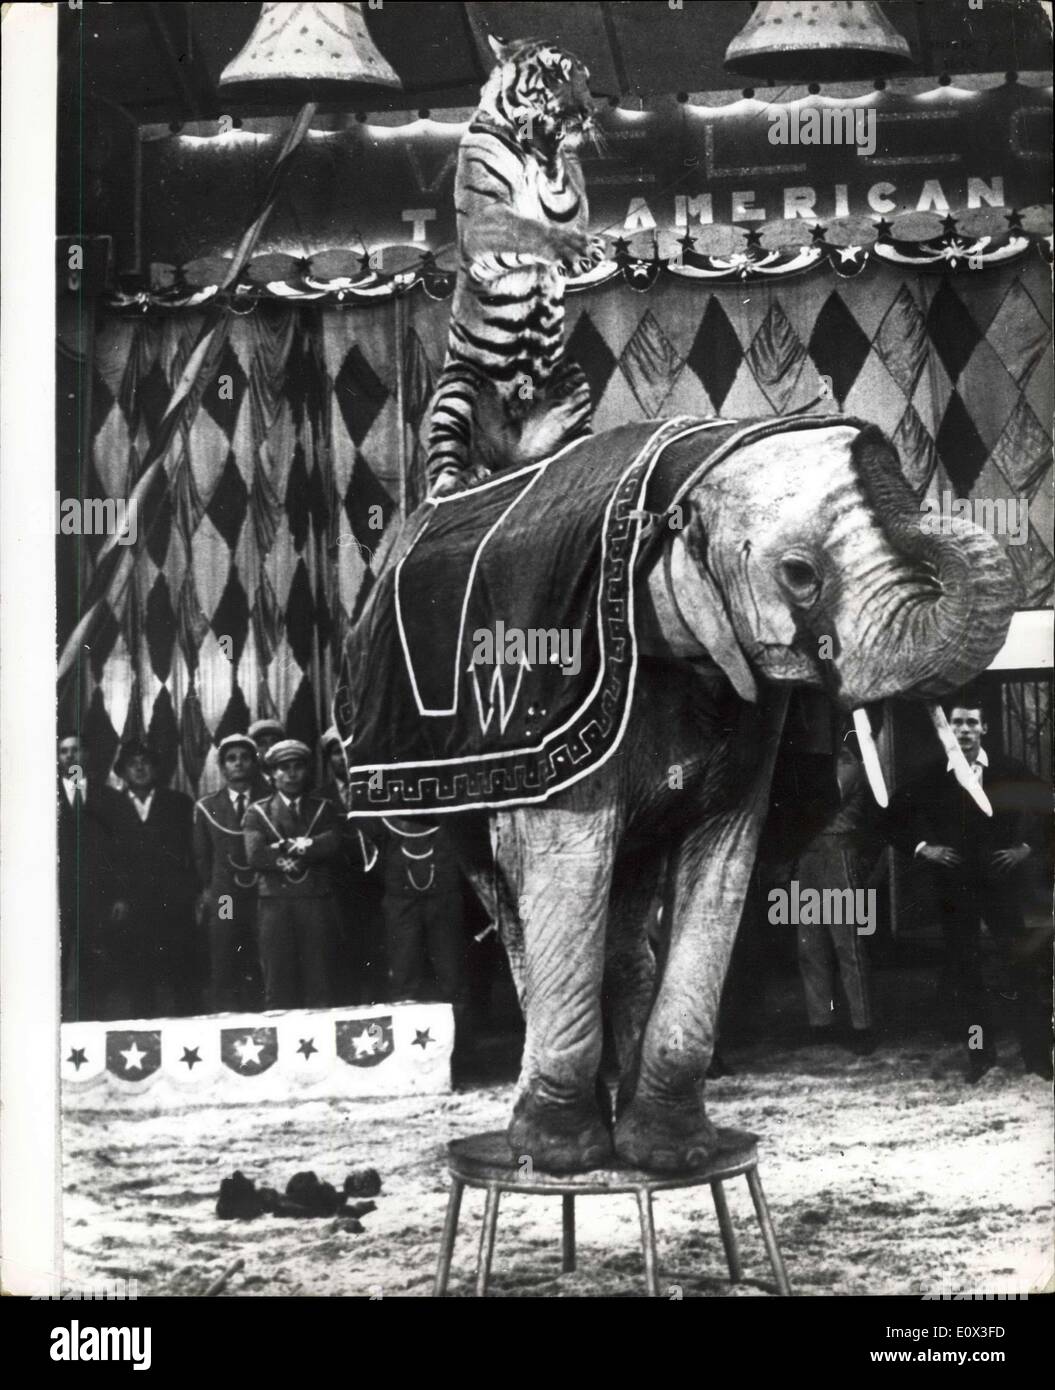 Jan. 09, 1965 - Tamer Gunter Williams touring Italy with an American circus gets a tiger to work with an Elephant: For the first time ever an any Circus a Tamer called Gunter Williams, has managed to get a Tiger called Bengala, to work in an act with a Elephant, the act comes from America and is being shown in Rome at the moment. Photo shows Bengala, the 3, year old Tiger working for the first time with Thalia the 10, year old Indian Elephant. Stock Photo